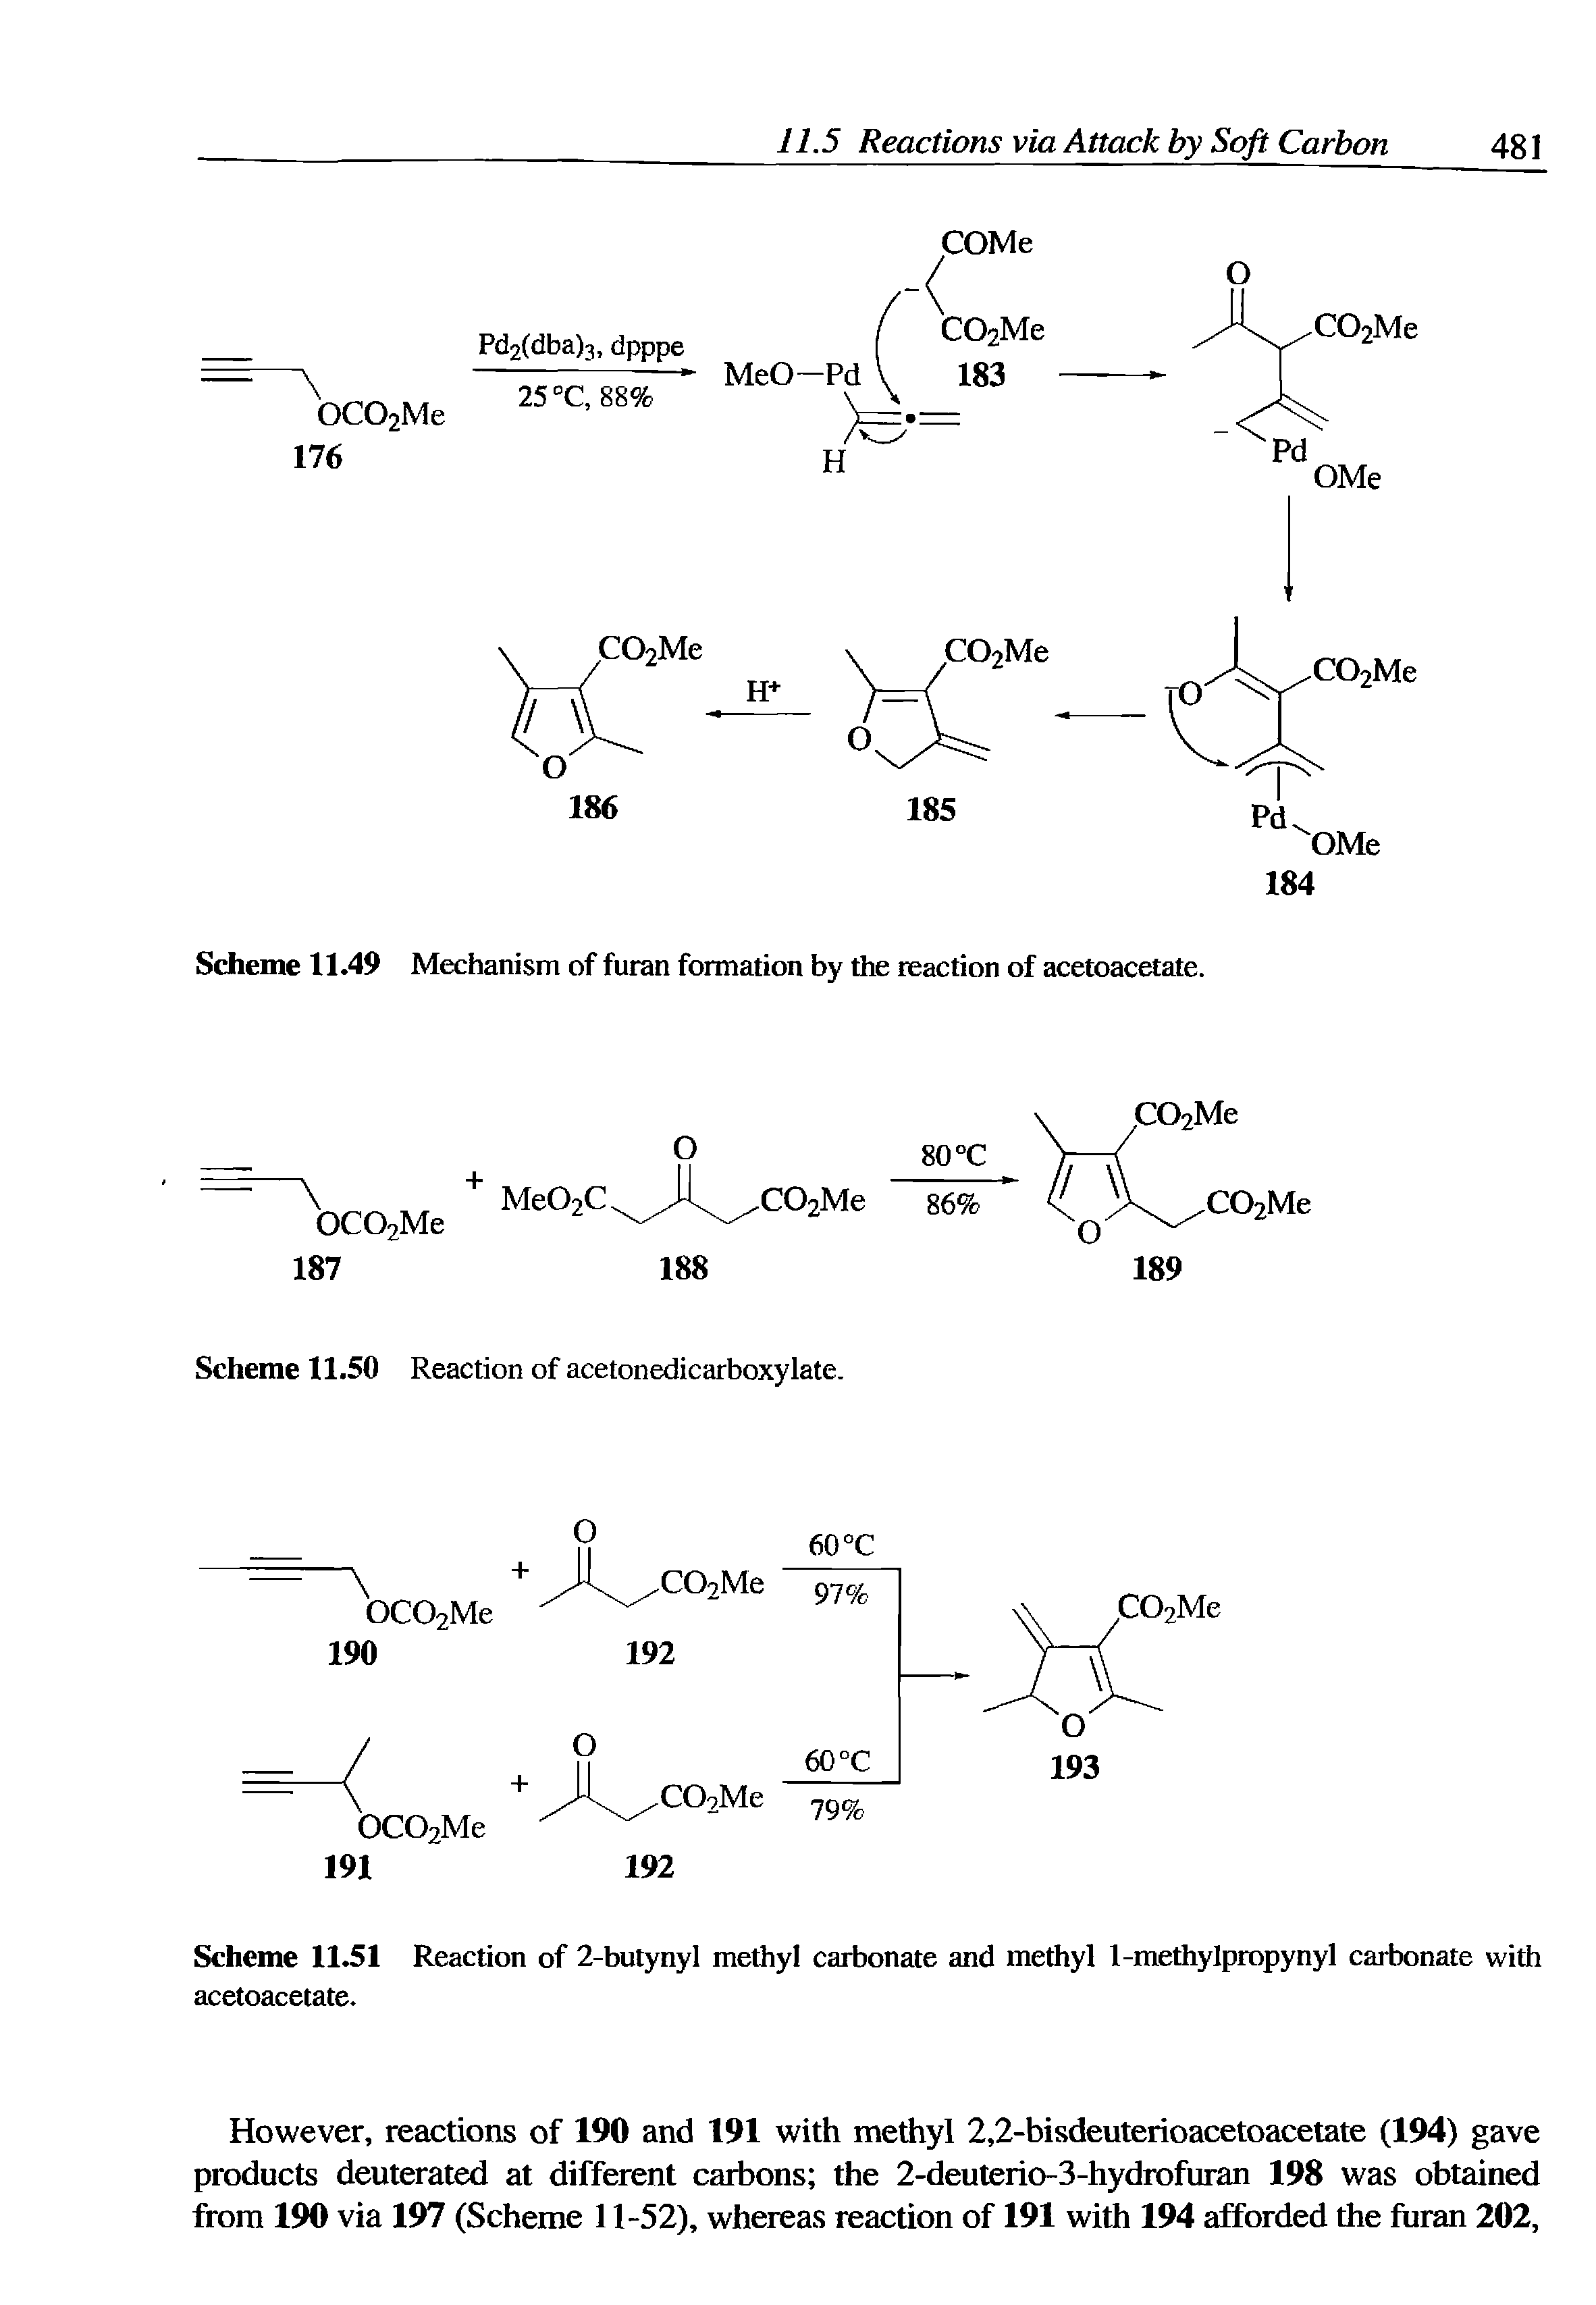 Scheme 11.49 Mechanism of furan formation by the reaction of acetoacetate.